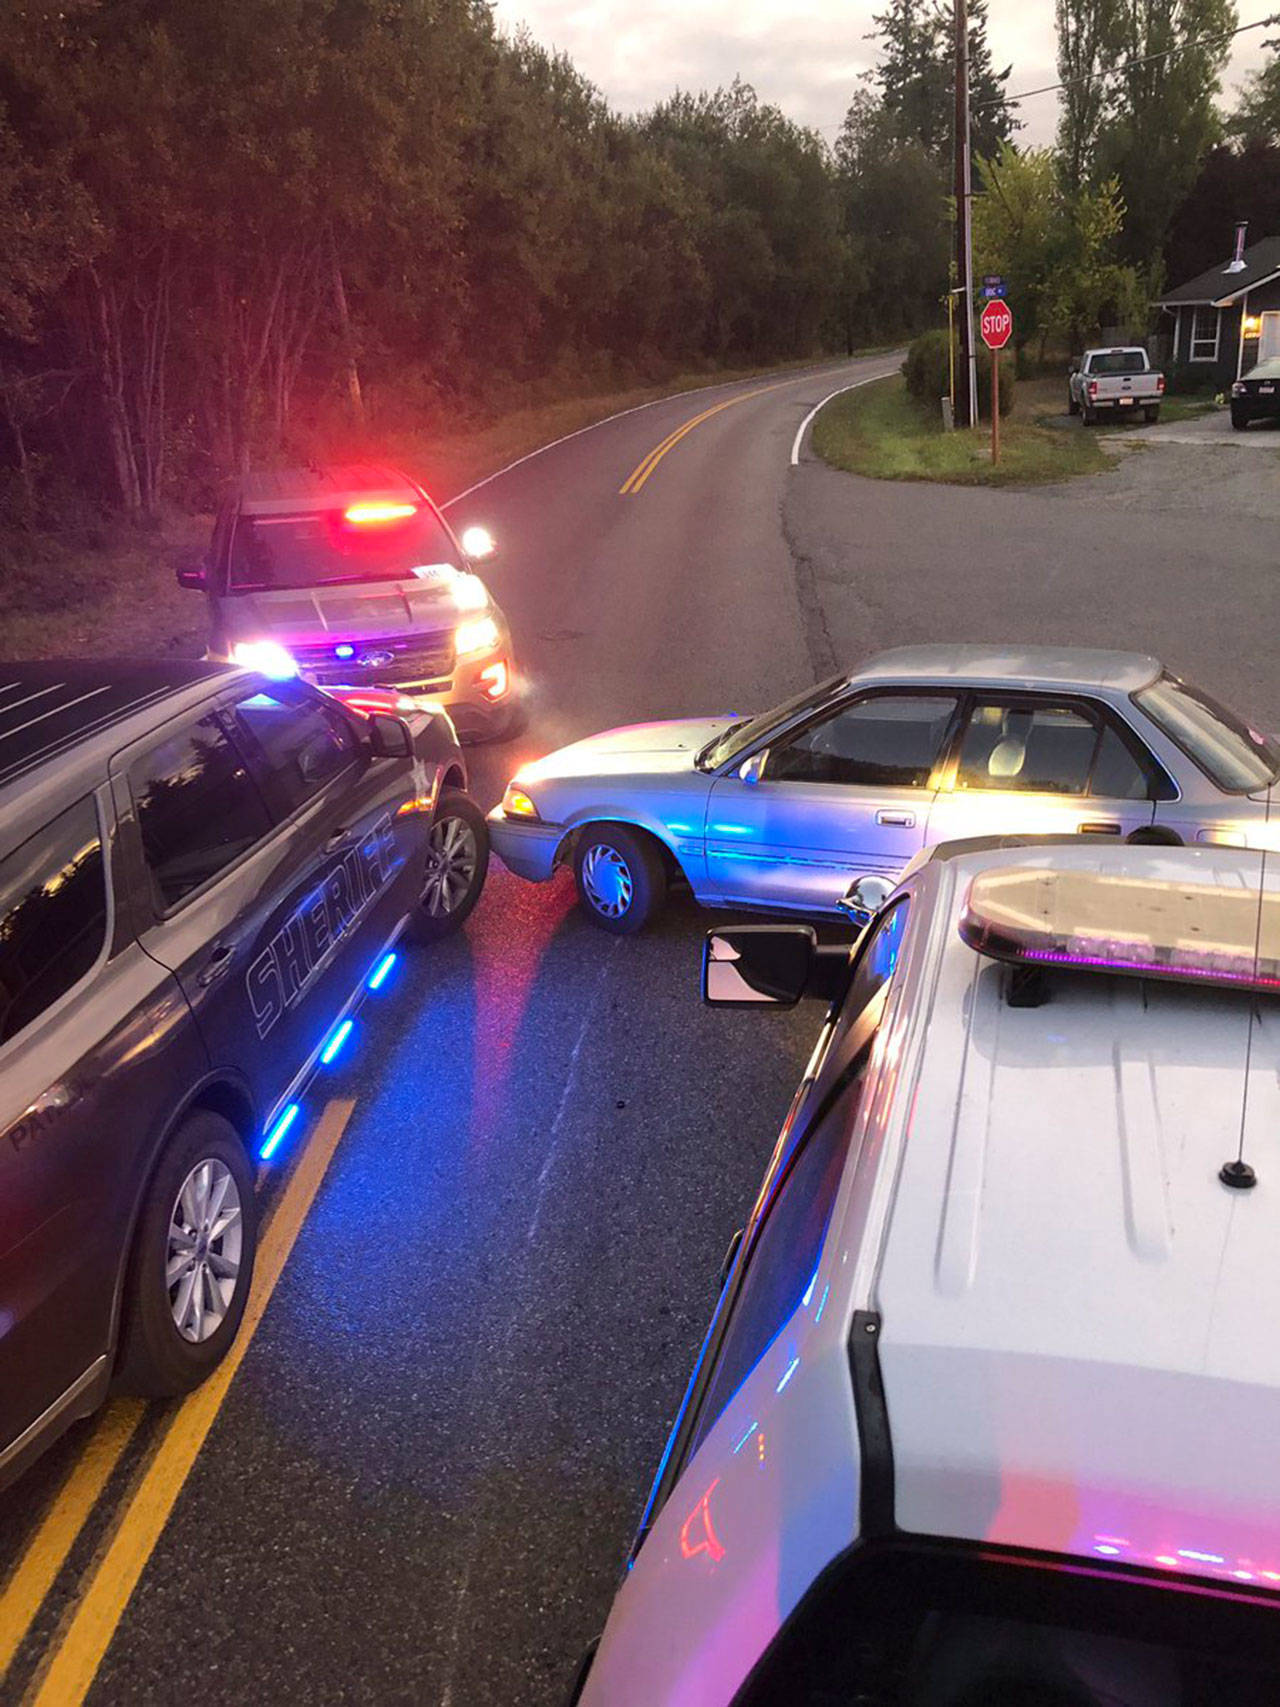 Jefferson County Sheriff’s deputies used a pursuit immobilization technique to stop an erratically driven vehicle Sunday on state Highway 19. (Jefferson County Sheriff’s Office)